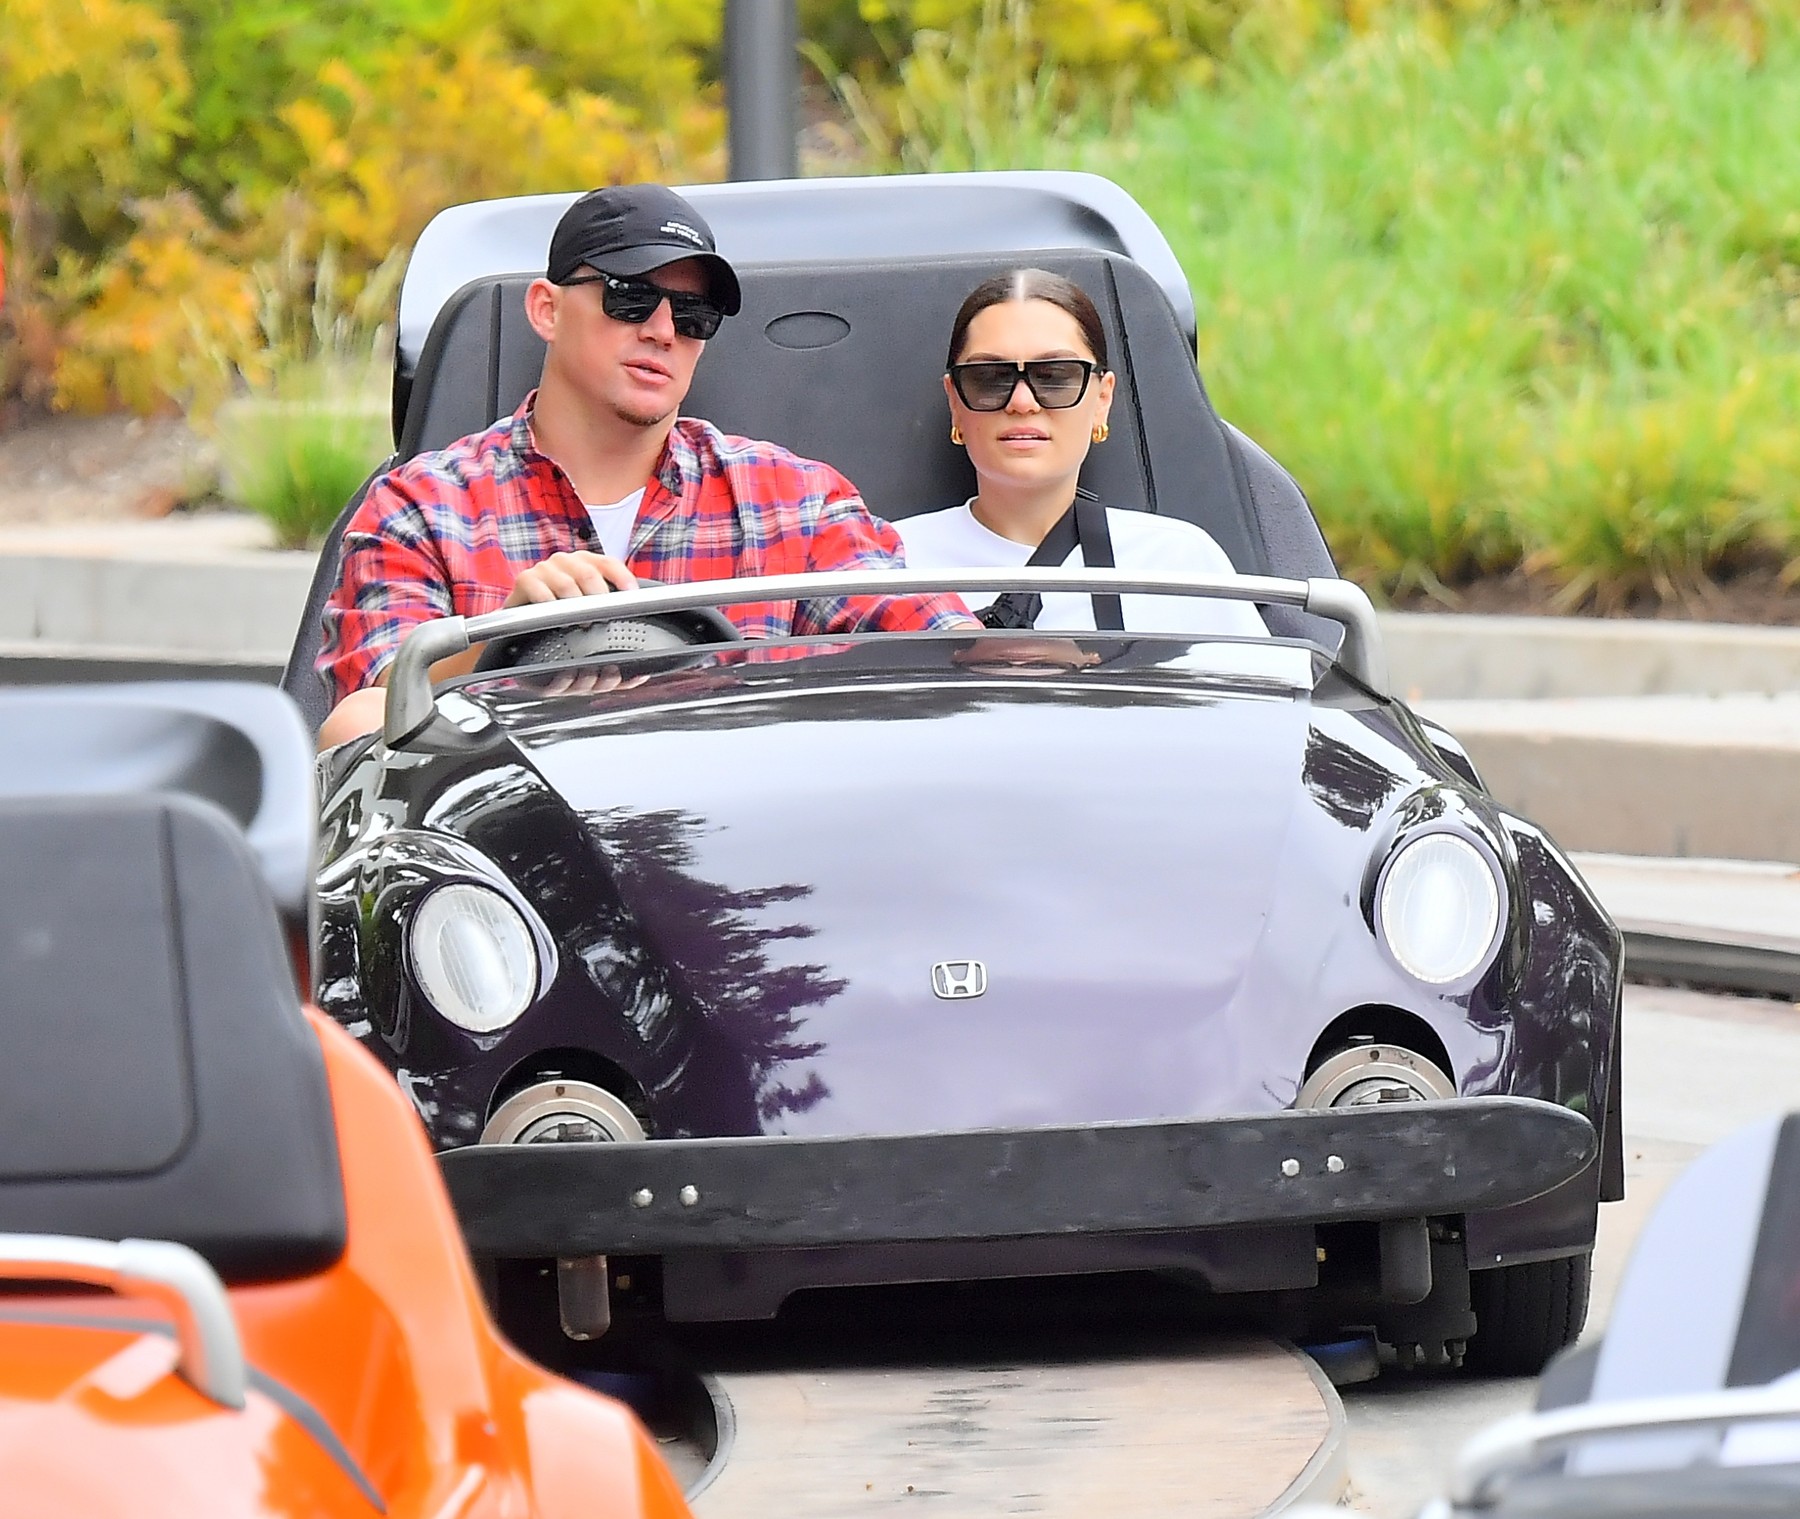 ** EXCLUSIVE PREMIUM RATES APPLY **   Channing Tatum and Jessie J look completely in love as they pack on endless PDA while on a date at the happiest place on earth, Disneyland. The happy couple, who were joined by a VIP tour guide as they spent the day at Disneyland. They were seen riding many of  the park's rides including the Matterhorn, Autopia and Space Mountain. They were seen constantly holding each other as they made their way through the park. 
At one point Jesse was seen giving Channing's nose a playful honk. 
They looked adorable as they rode the Autopia ride together.
15 May 2019, Image: 433811695, License: Rights-managed, Restrictions: World Rights, Model Release: no, Credit line: Marksman/ Snorlax / MEGA / The Mega Agency / Profimedia